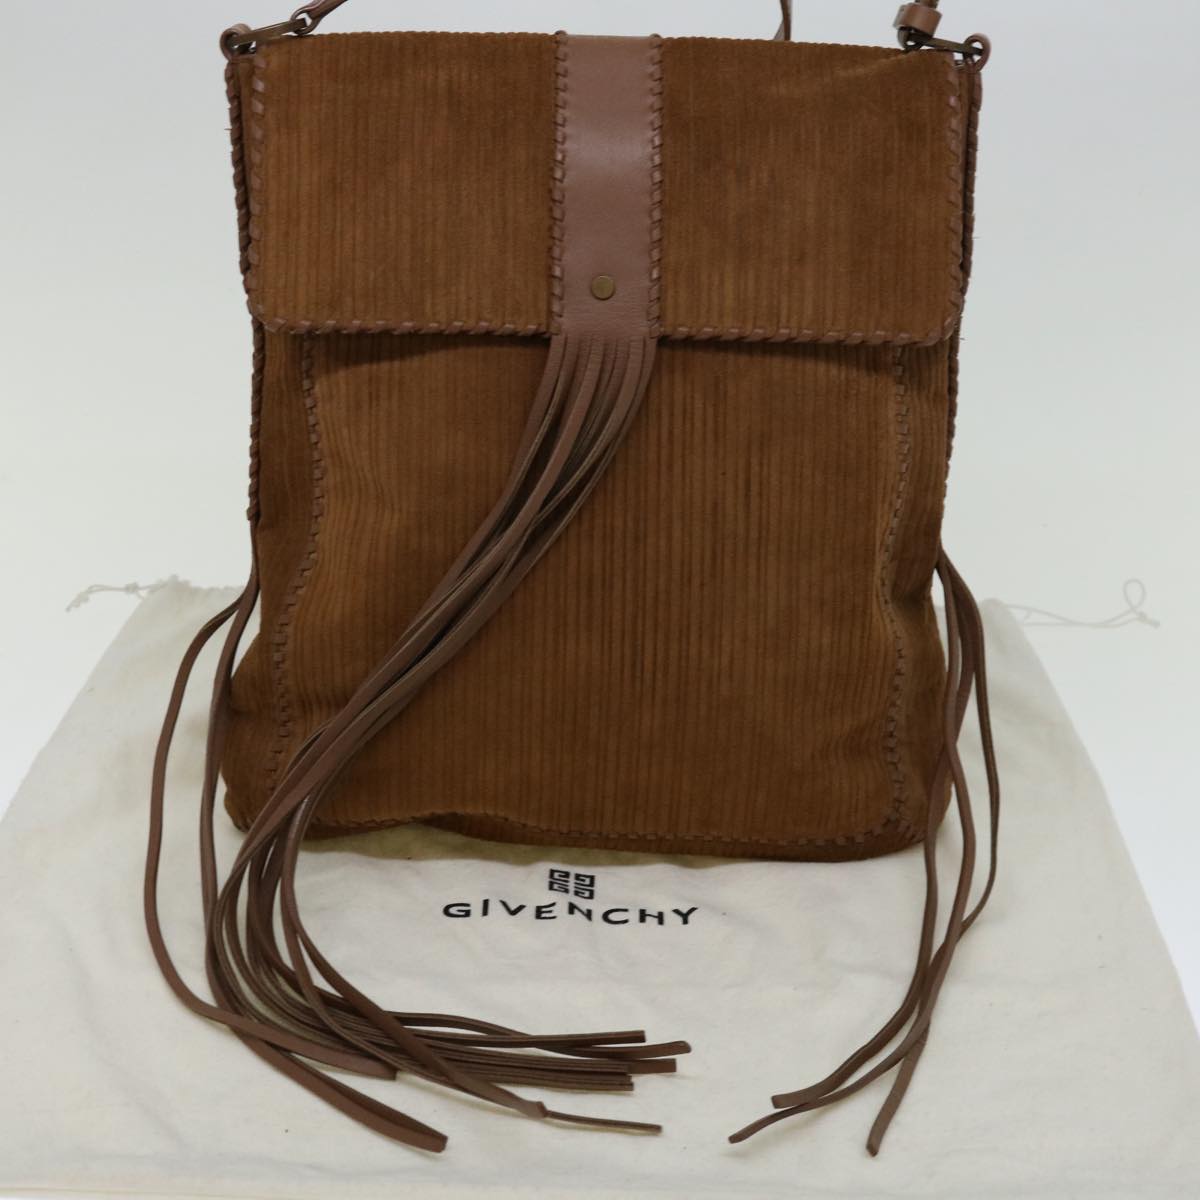 GIVENCHY Shoulder Bag Suede Brown Auth bs12943